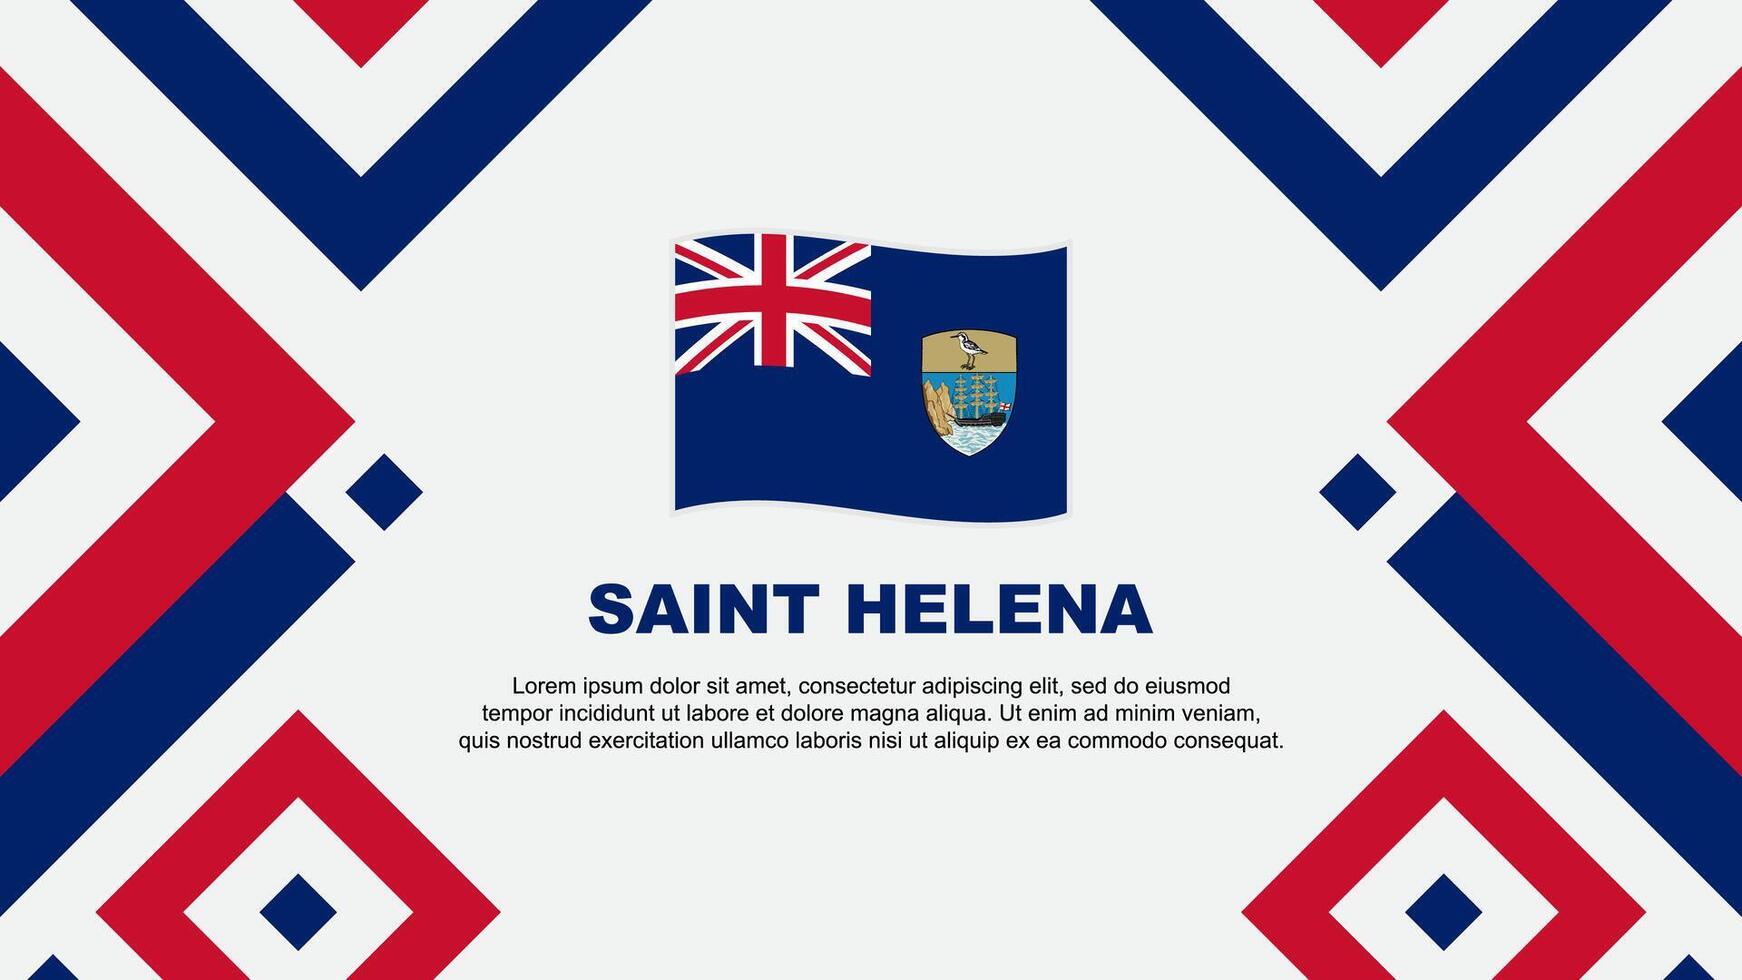 Saint Helena Flag Abstract Background Design Template. Saint Helena Independence Day Banner Wallpaper Vector Illustration. Saint Helena Template